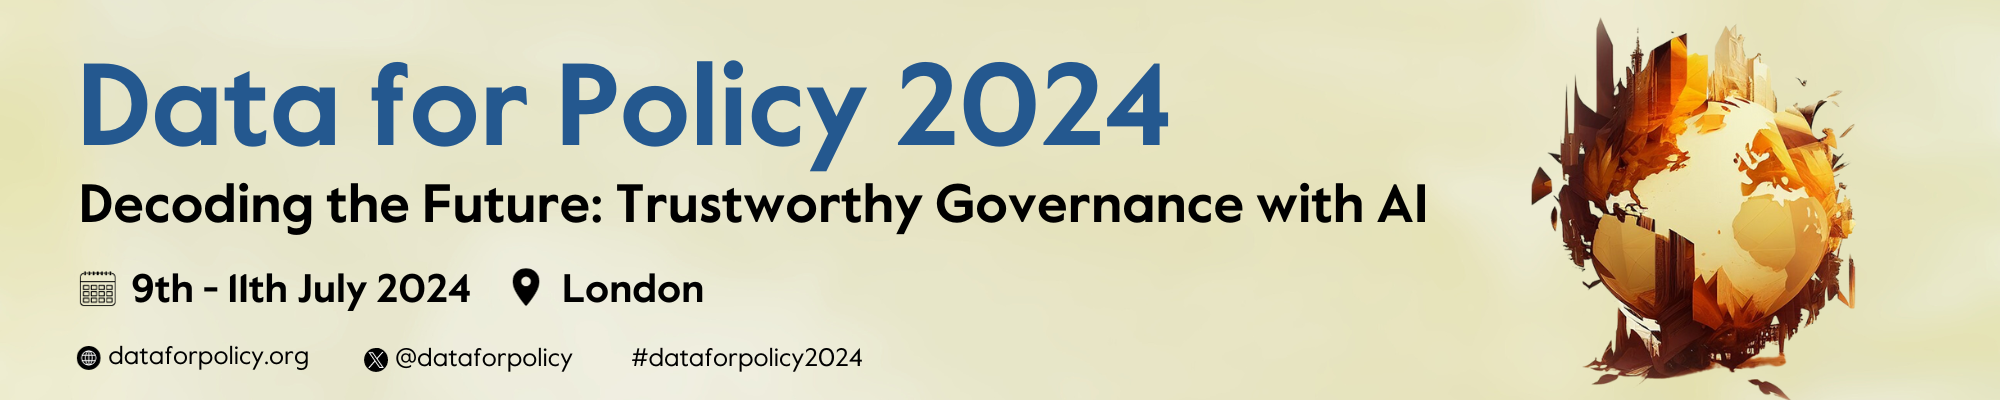 Data for Policy 2024